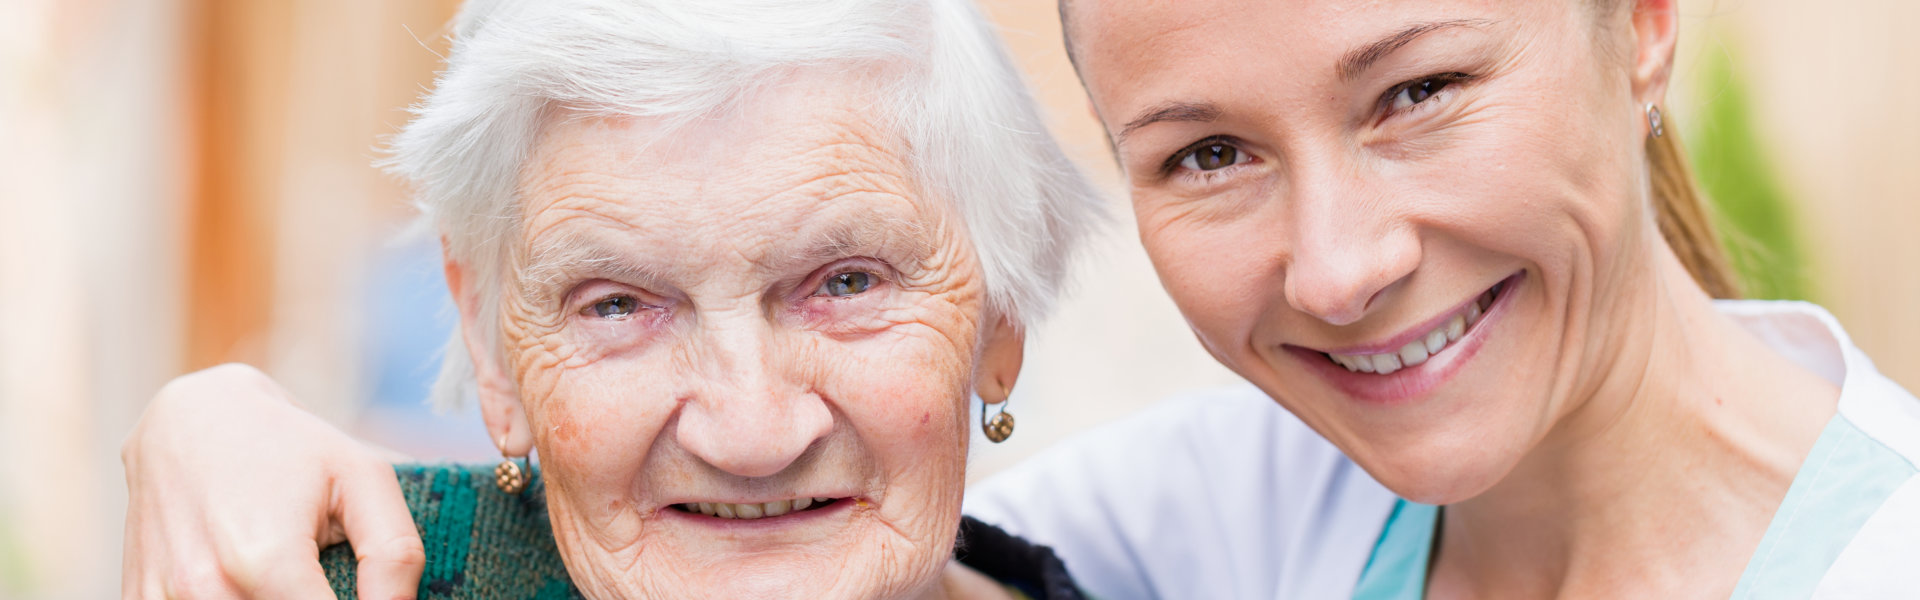 Elderly woman and female caregiver smiling